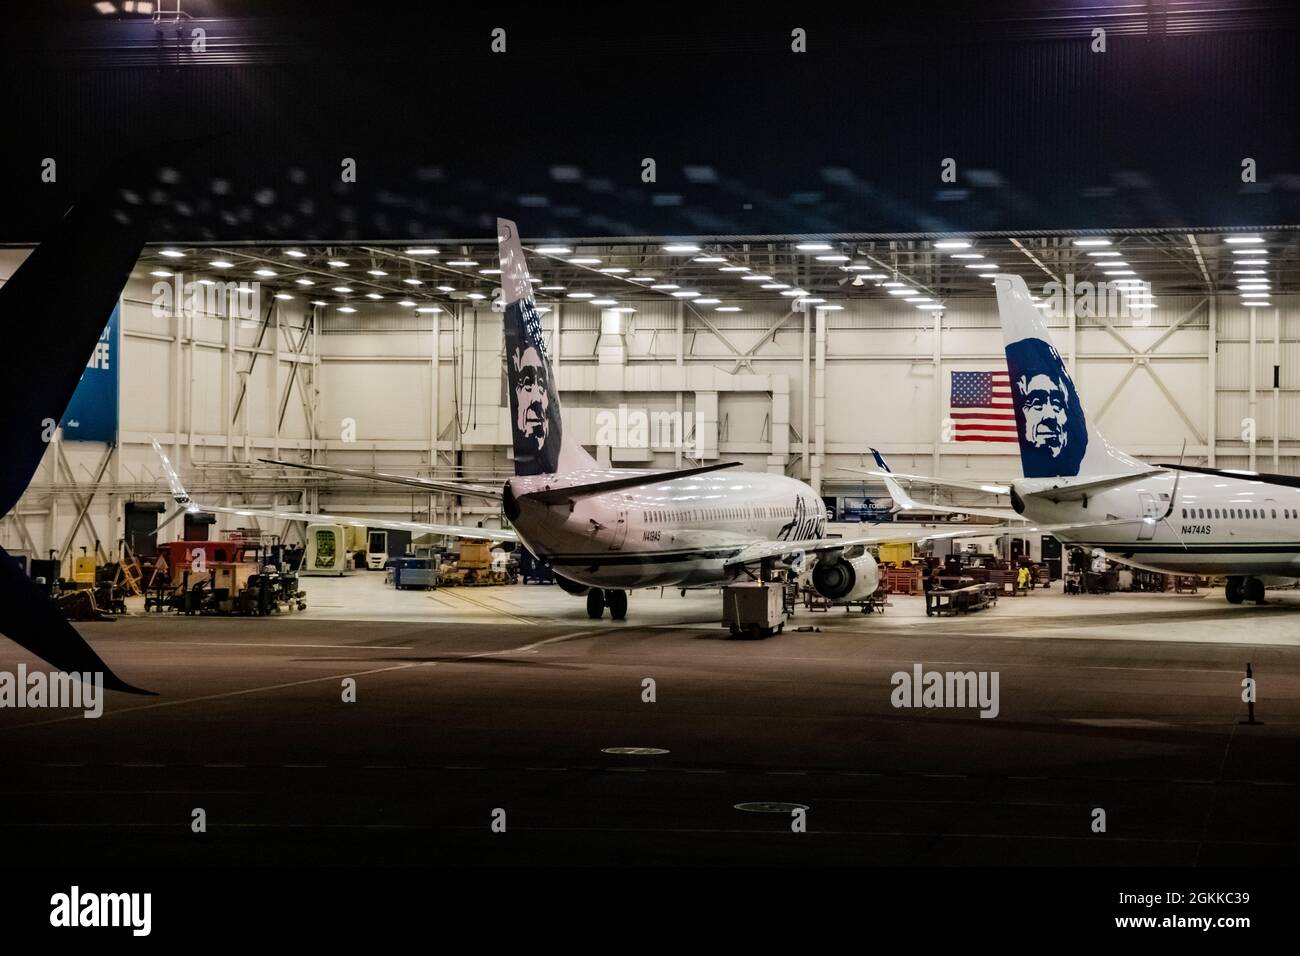 Alaska Airlines maintenance hangar at SeaTac airport, Seattle, Washington State, USA [No property release; editorial licensing only] Stock Photo